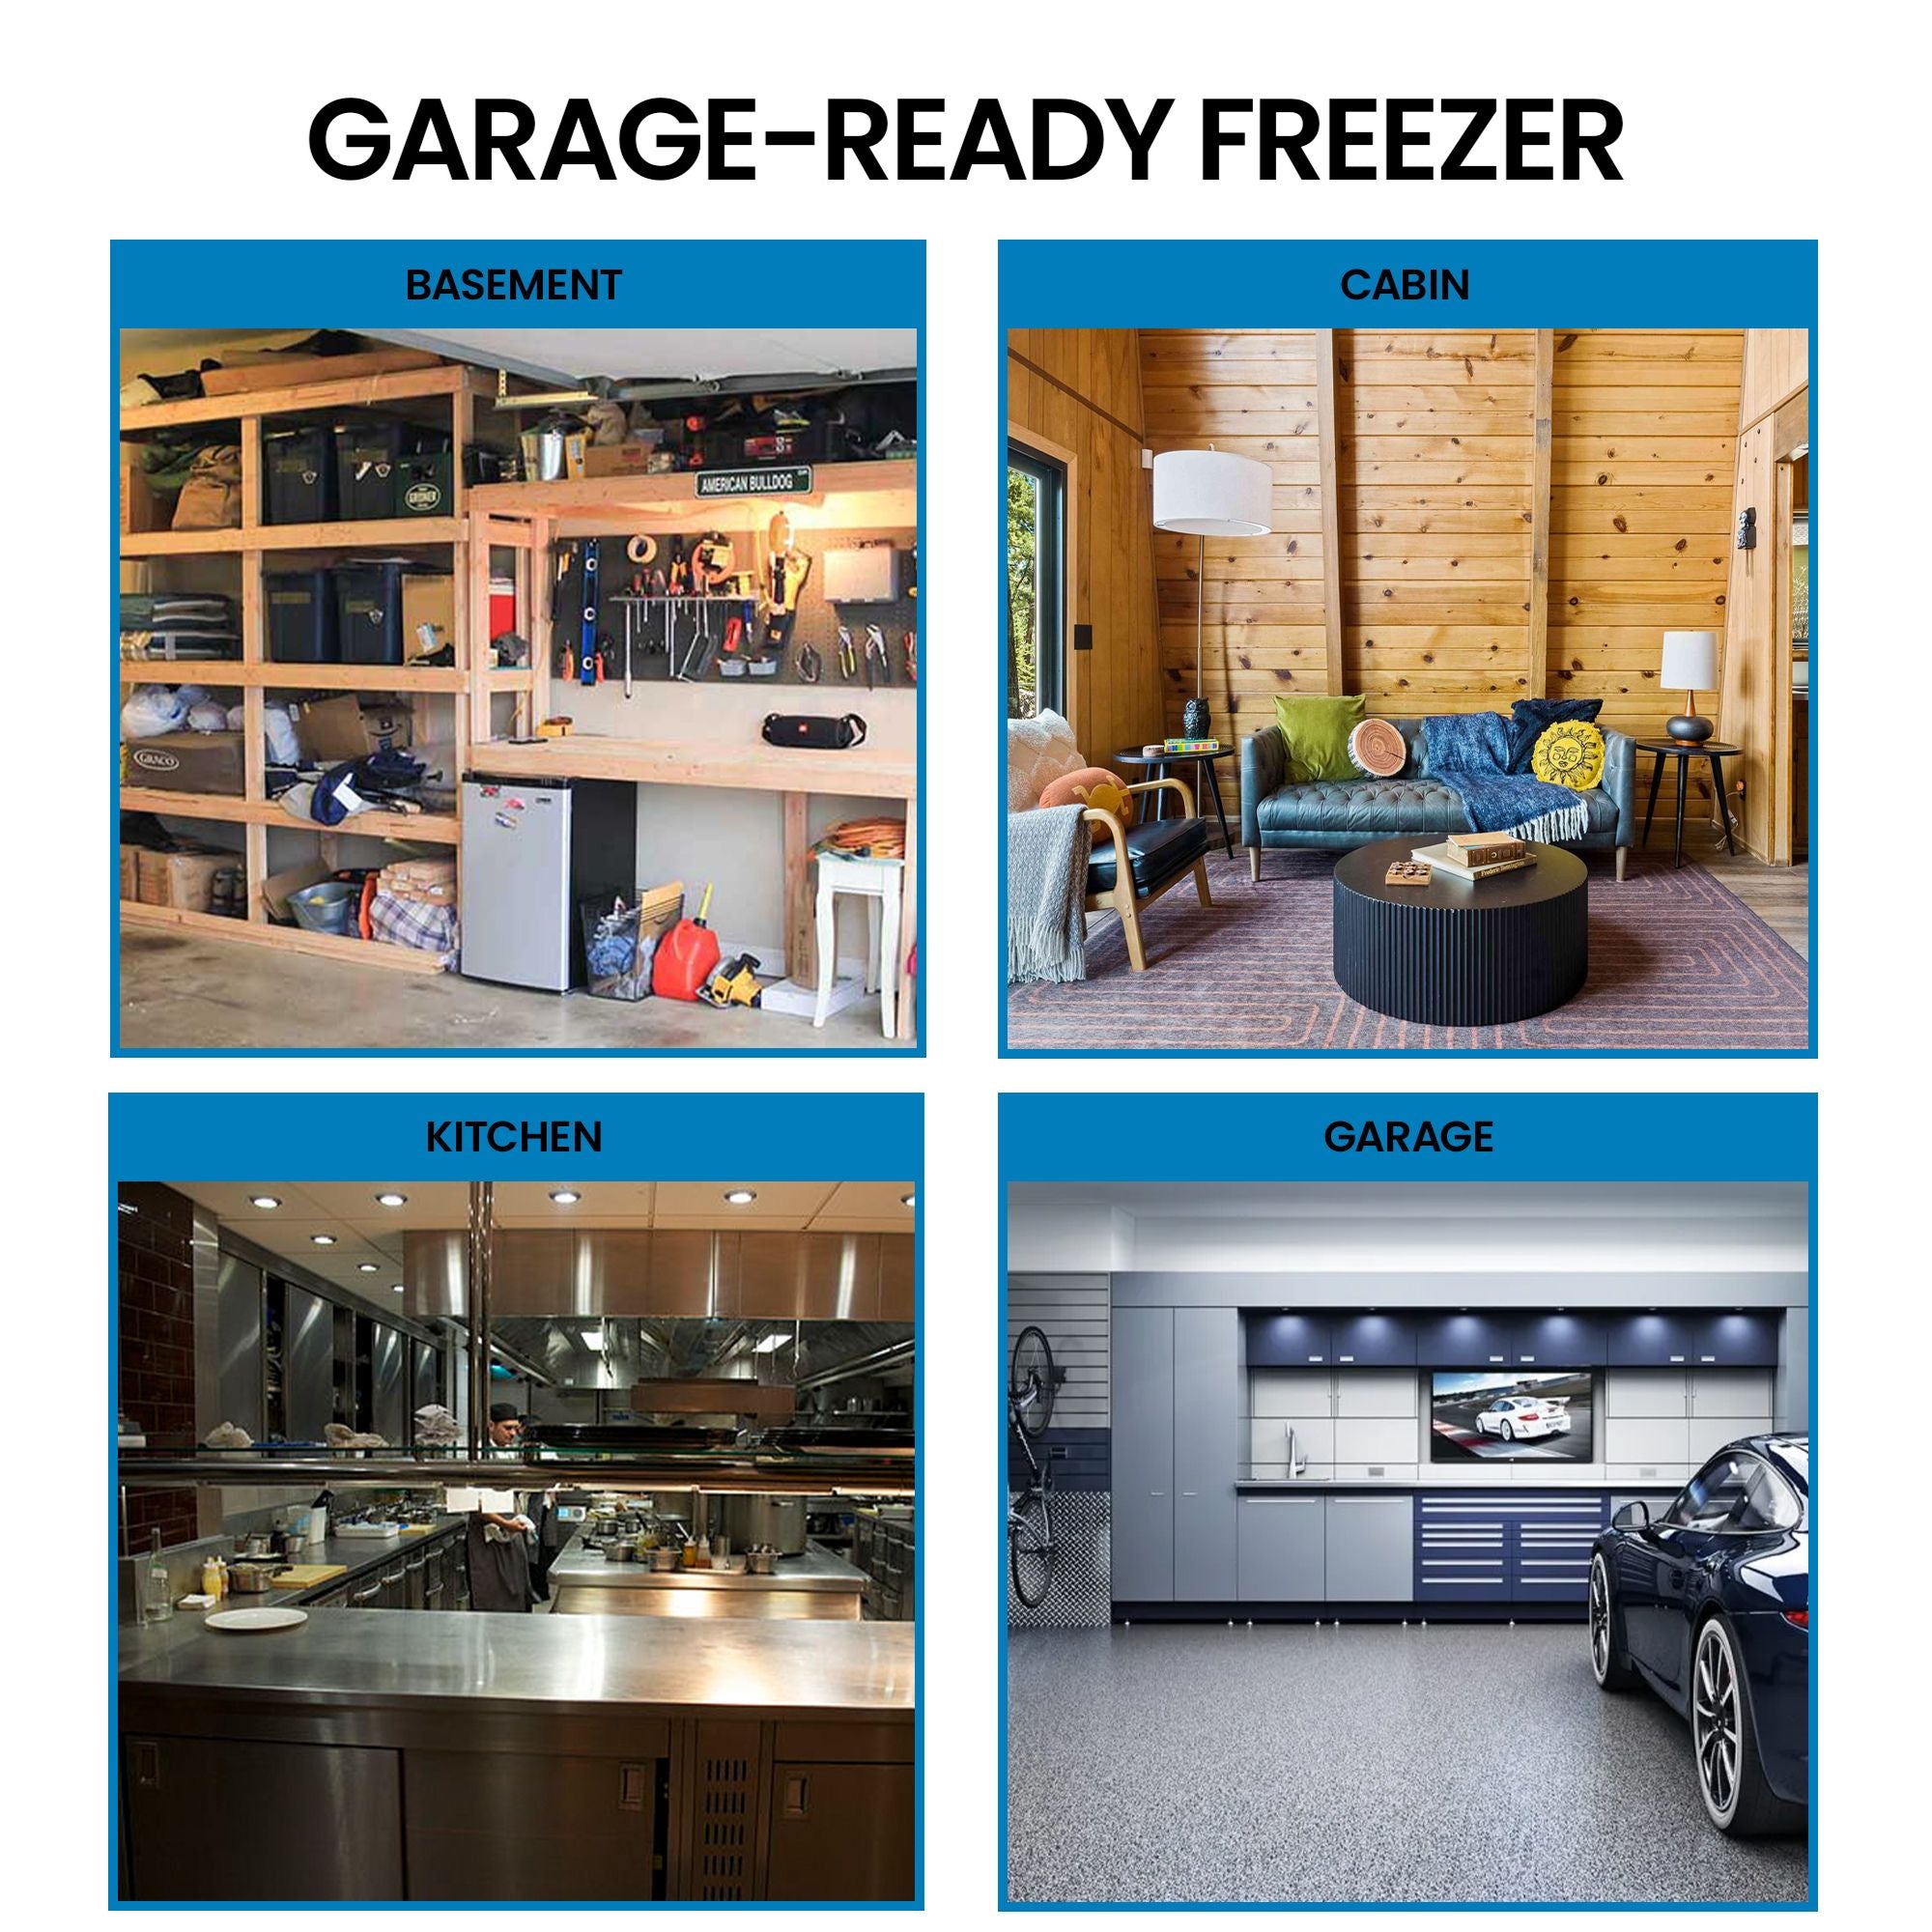 Four images show settings where the freezer could be used: Basement, cabin, kitchen, garage. Text above reads, "Garage-ready freezer"